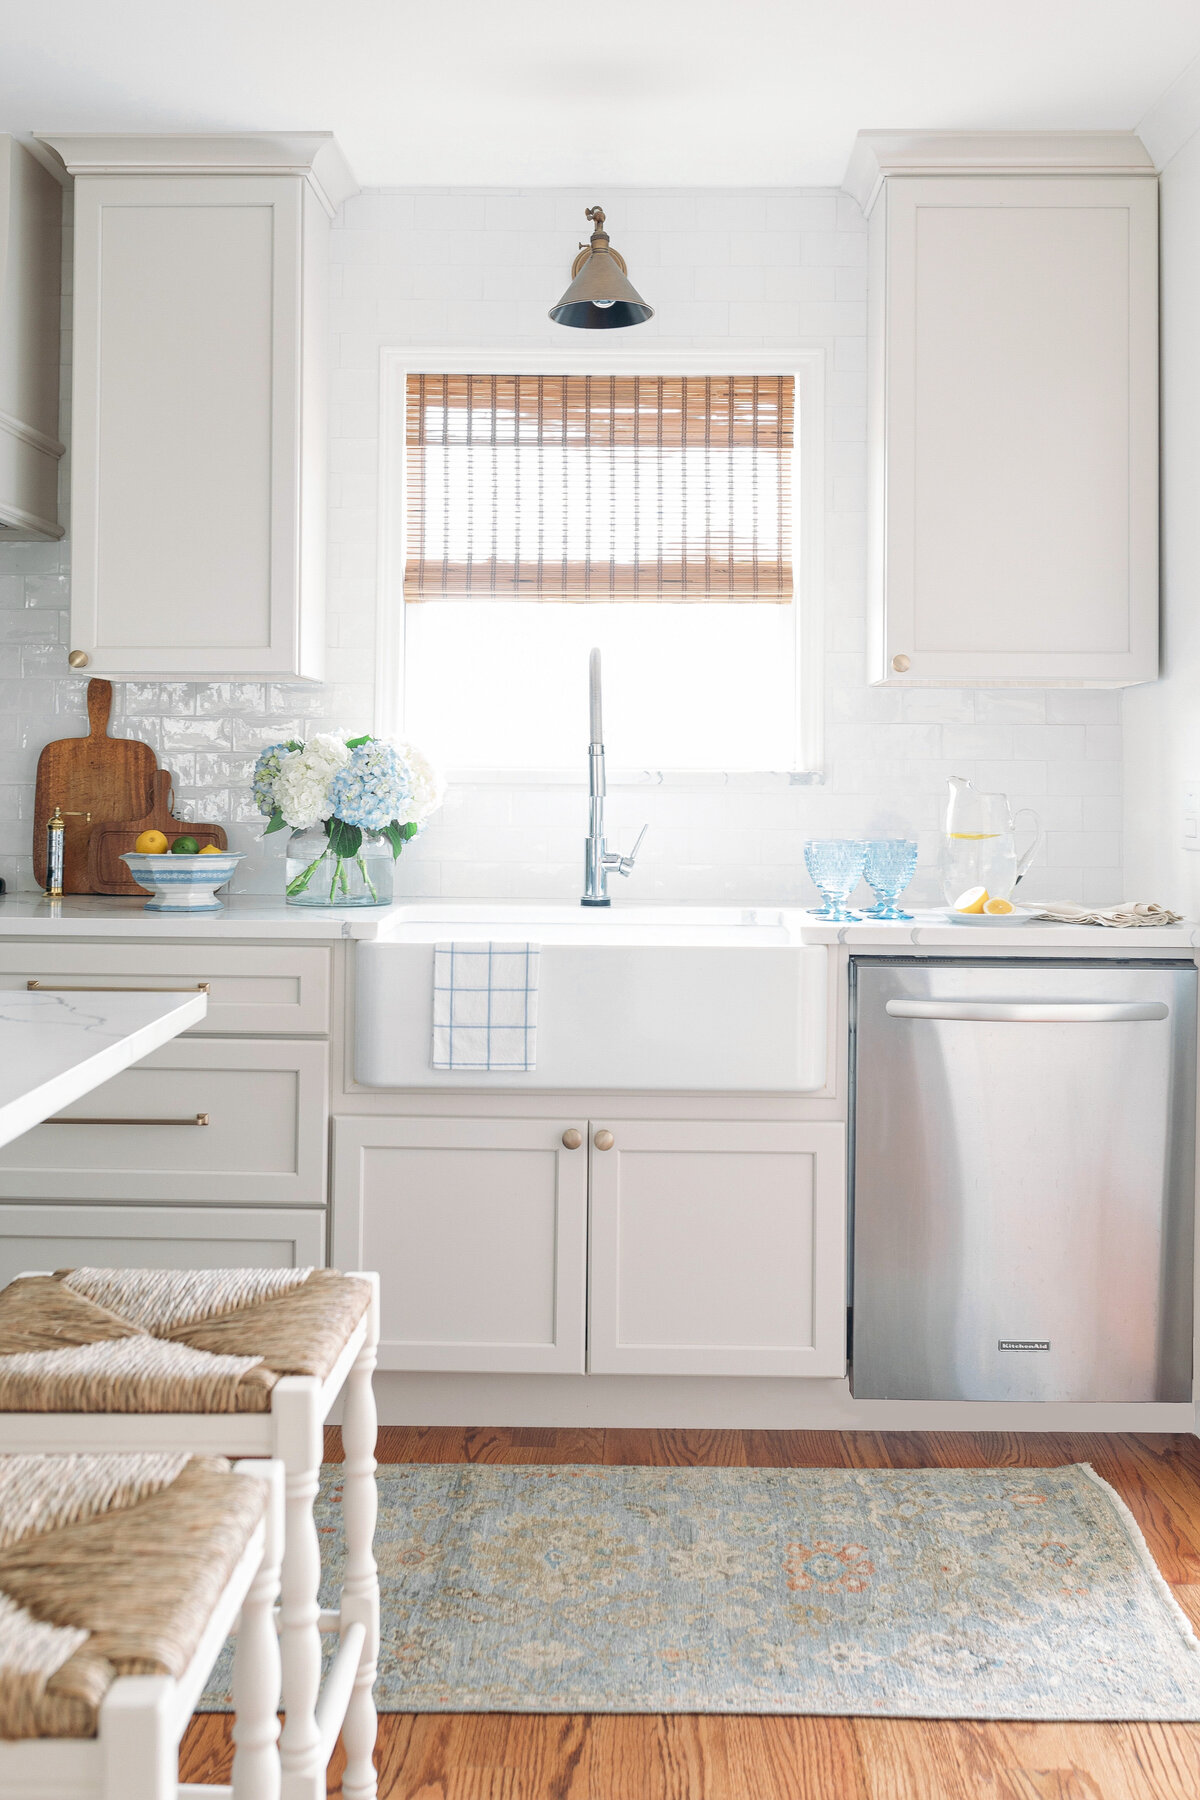 Fresh traditional kitchen renovation and white porcelain sink with window above and bamboo shades